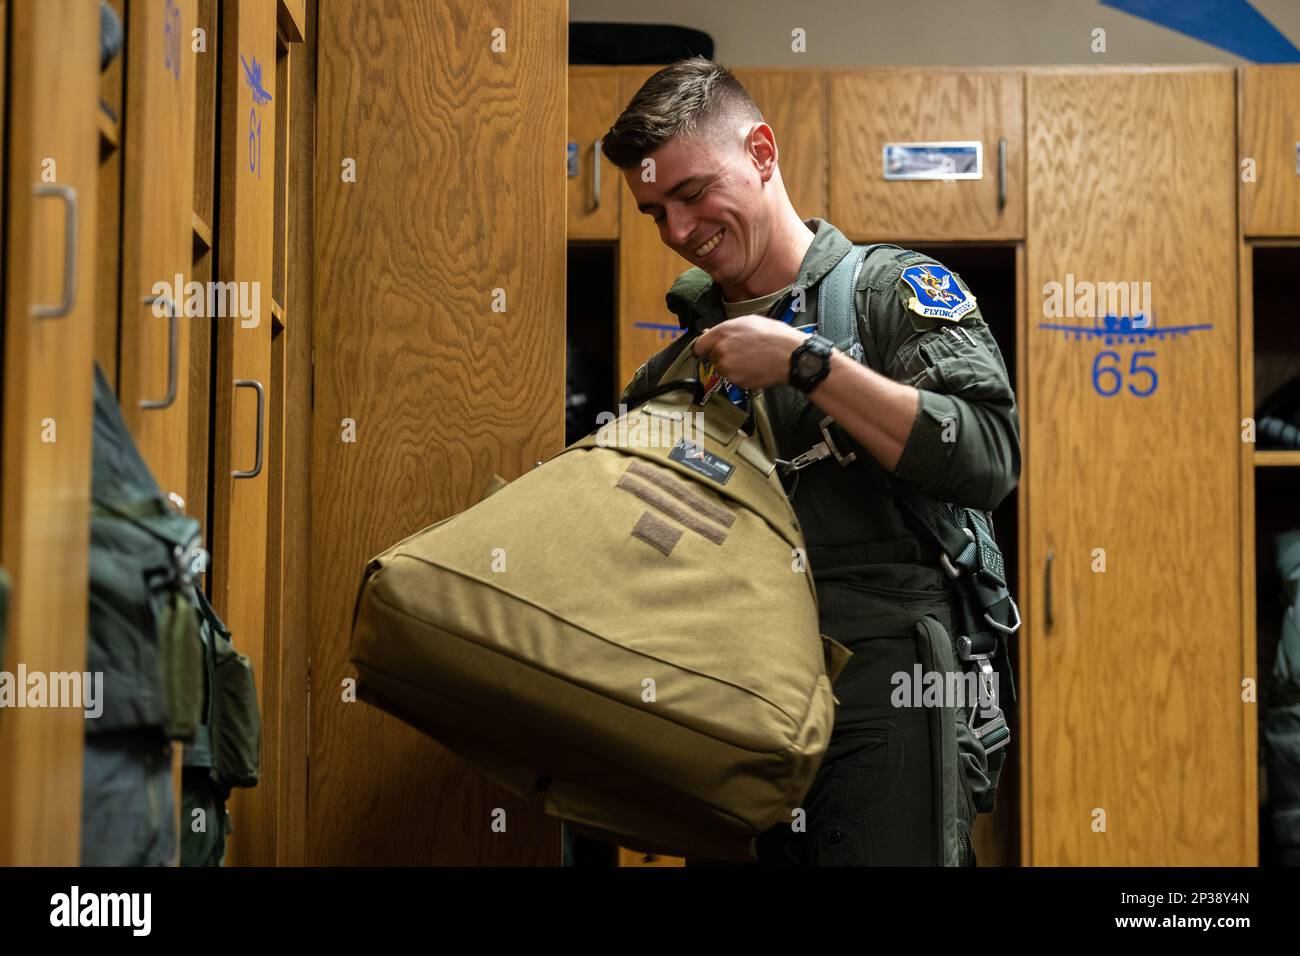 U.S. Air Force 1st Lt. William Laingen, 74th Fighter Squadron A-10C Thunderbolt II pilot, gathers his gear at Moody Air Force Base, Georgia, Jan. 4, 2023. Before flying, pilots put on their G-suit and harness, then place their helmet in a bag to carry to the aircraft. The harness connects the pilot to their seat to ensure proper ejection in case of an emergency. Stock Photo